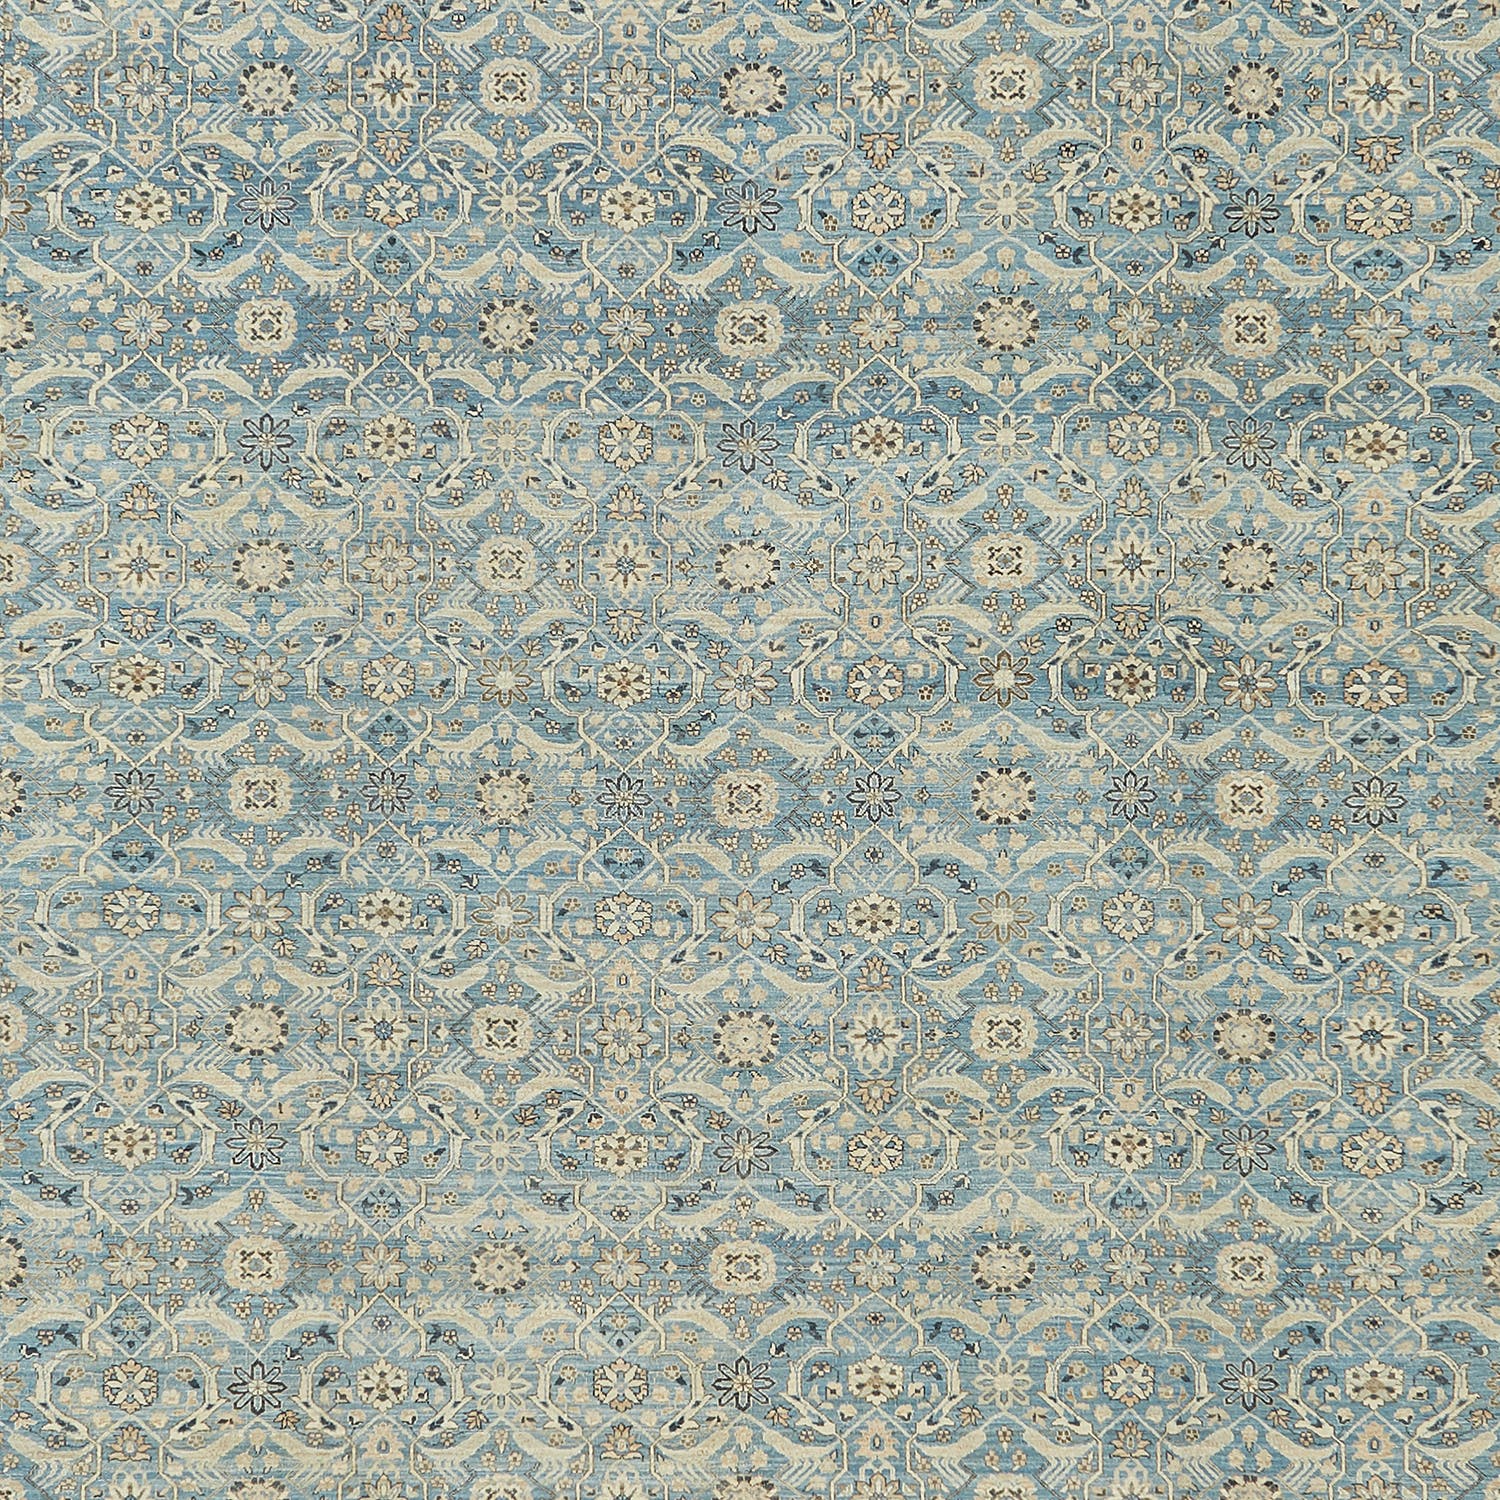 Intricate floral motif textile with classical Victorian influence in soft blue.